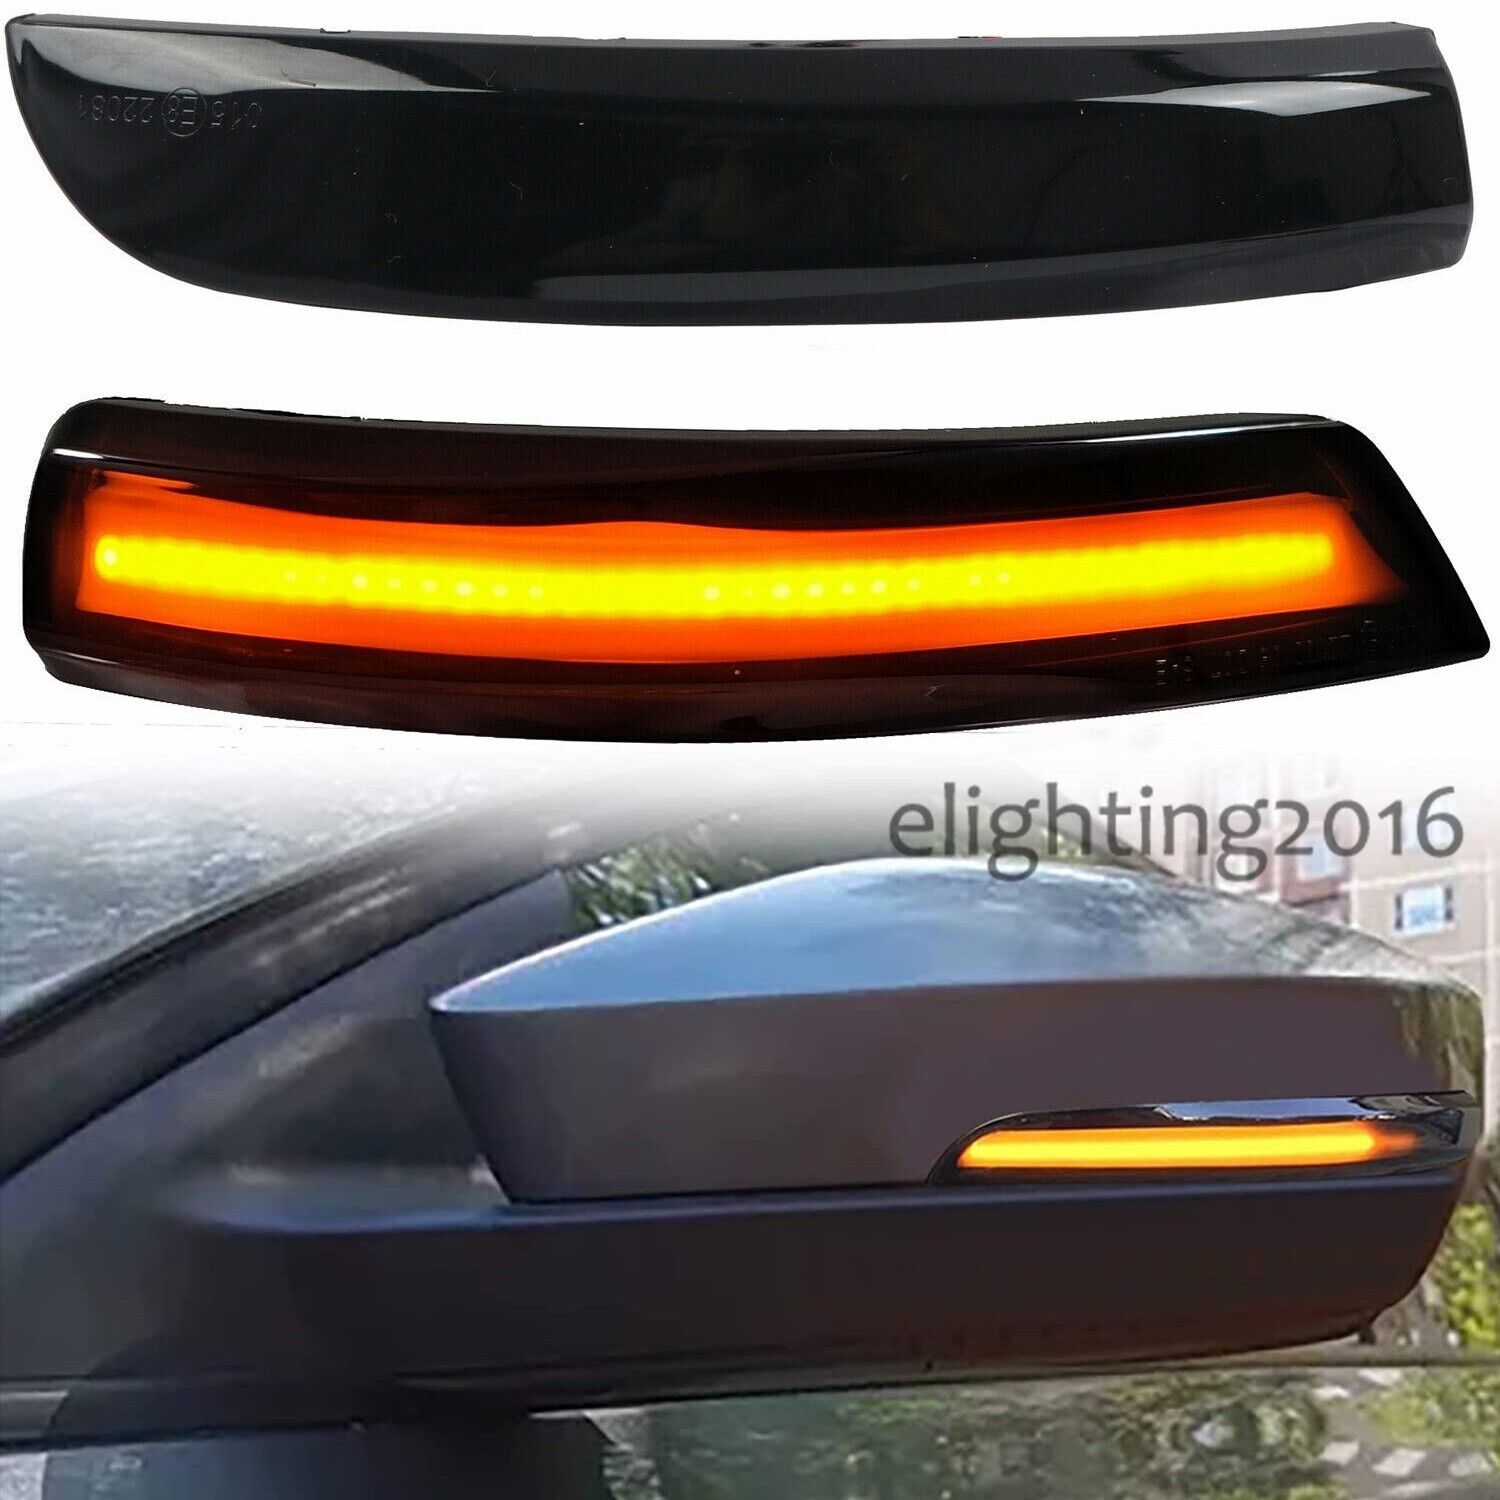 Sequential LED Side Mirror Turn Signal Light for Ford Kuga Escape EcoSport Focus